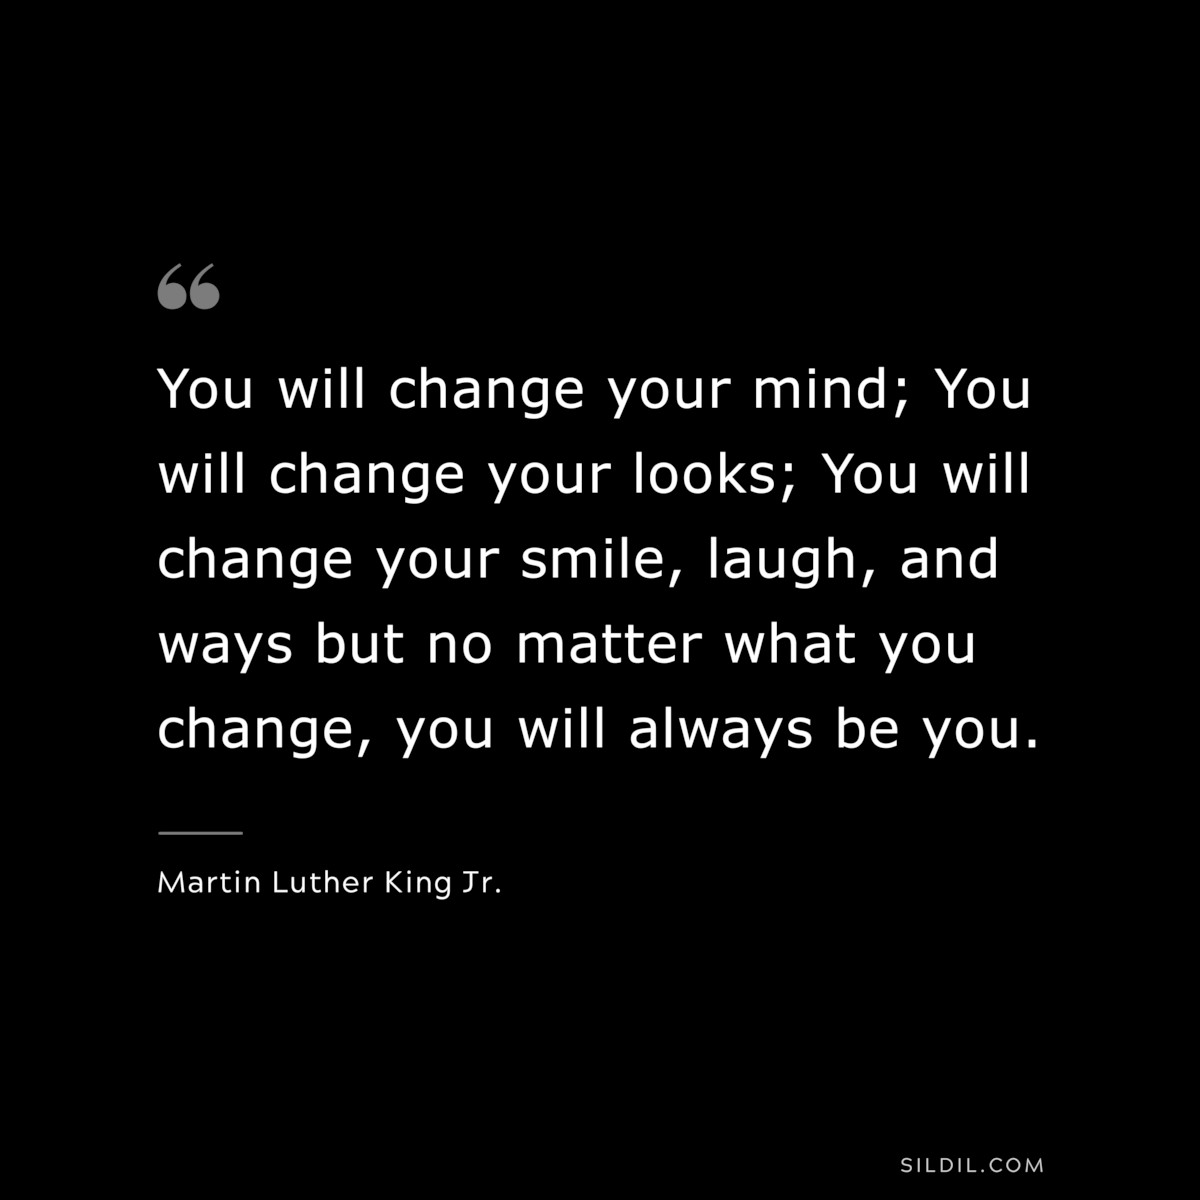 You will change your mind; You will change your looks; You will change your smile, laugh, and ways but no matter what you change, you will always be you. ― Martin Luther King Jr.